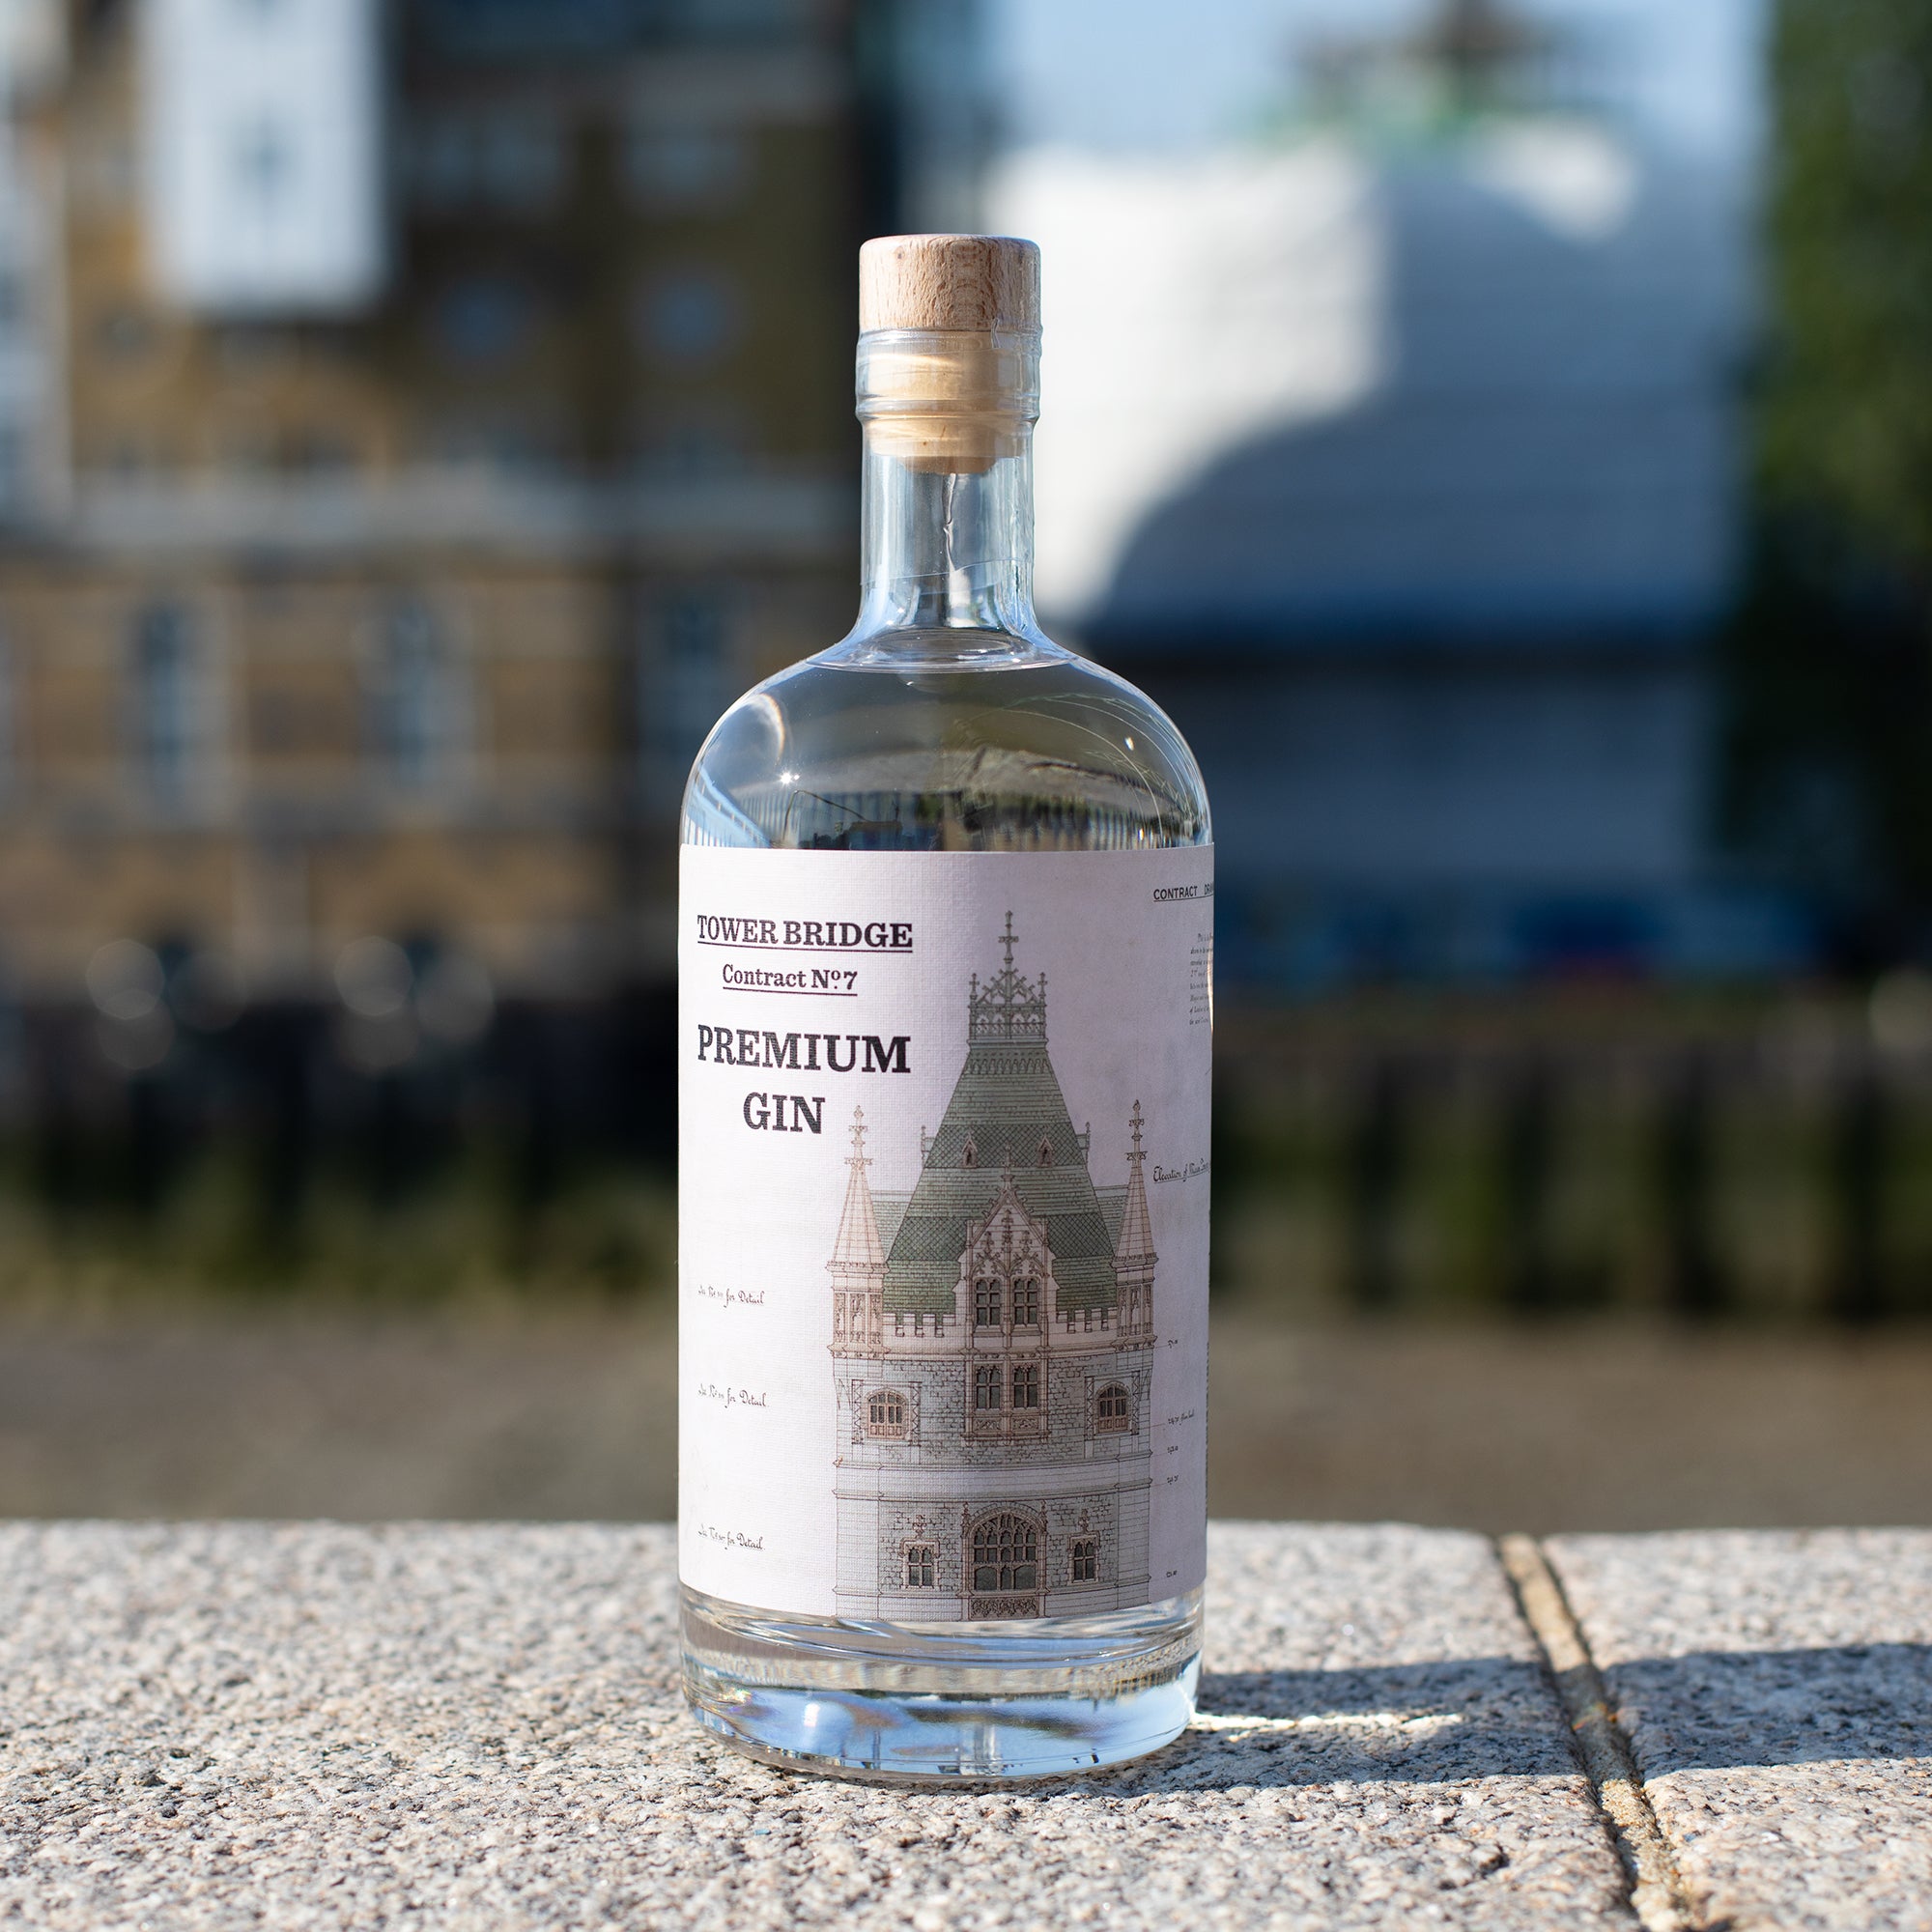 Tower Bridge Contract No. 7 Premium Gin by the River Thames